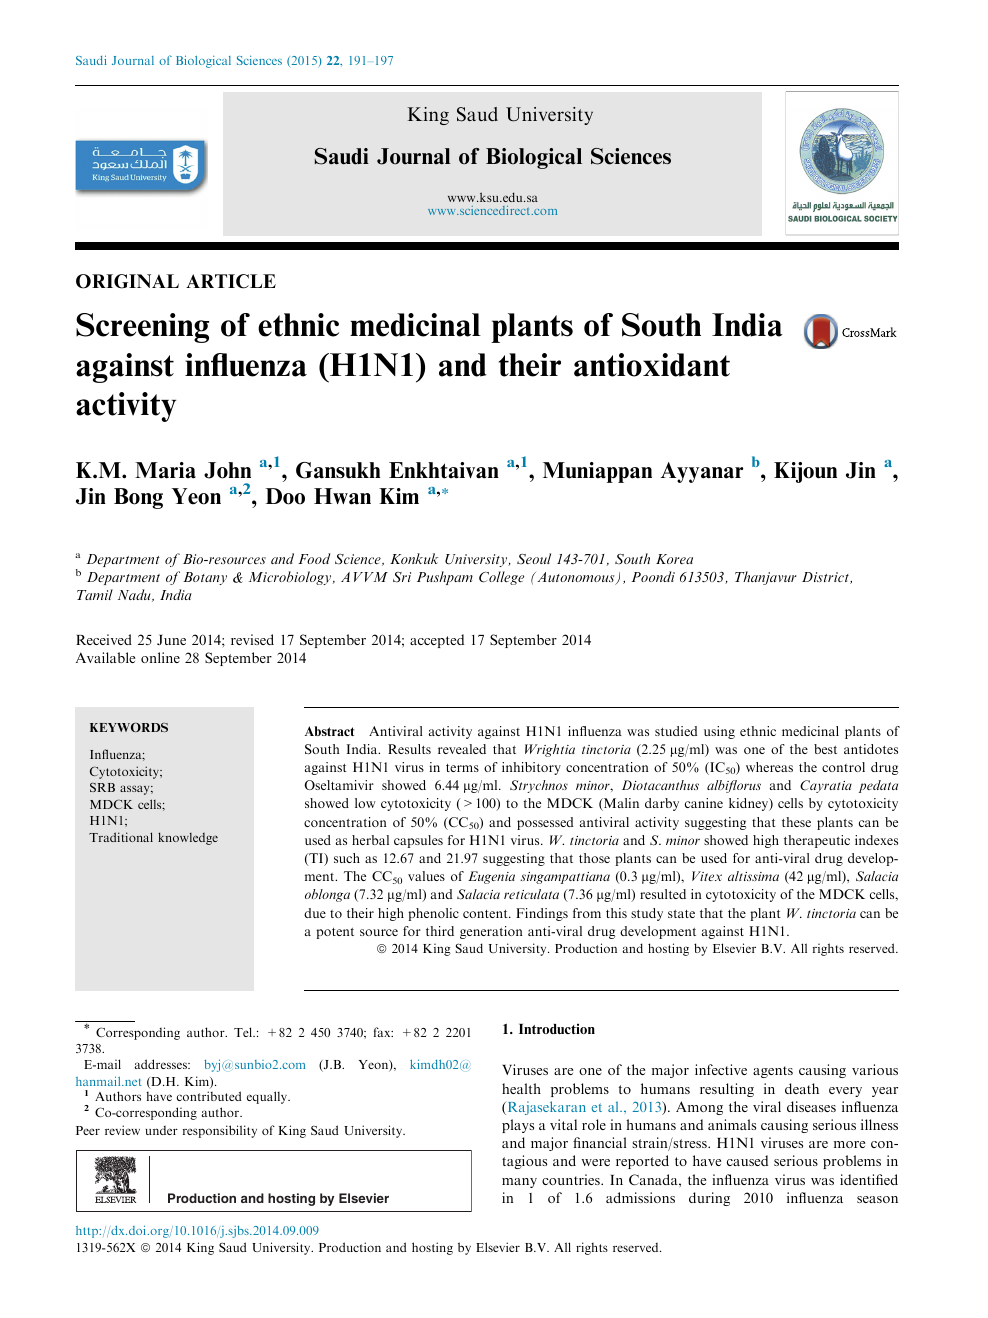 Screening Of Ethnic Medicinal Plants Of South India Against Influenza H1n1 And Their Antioxidant Activity Topic Of Research Paper In Biological Sciences Download Scholarly Article Pdf And Read For Free On